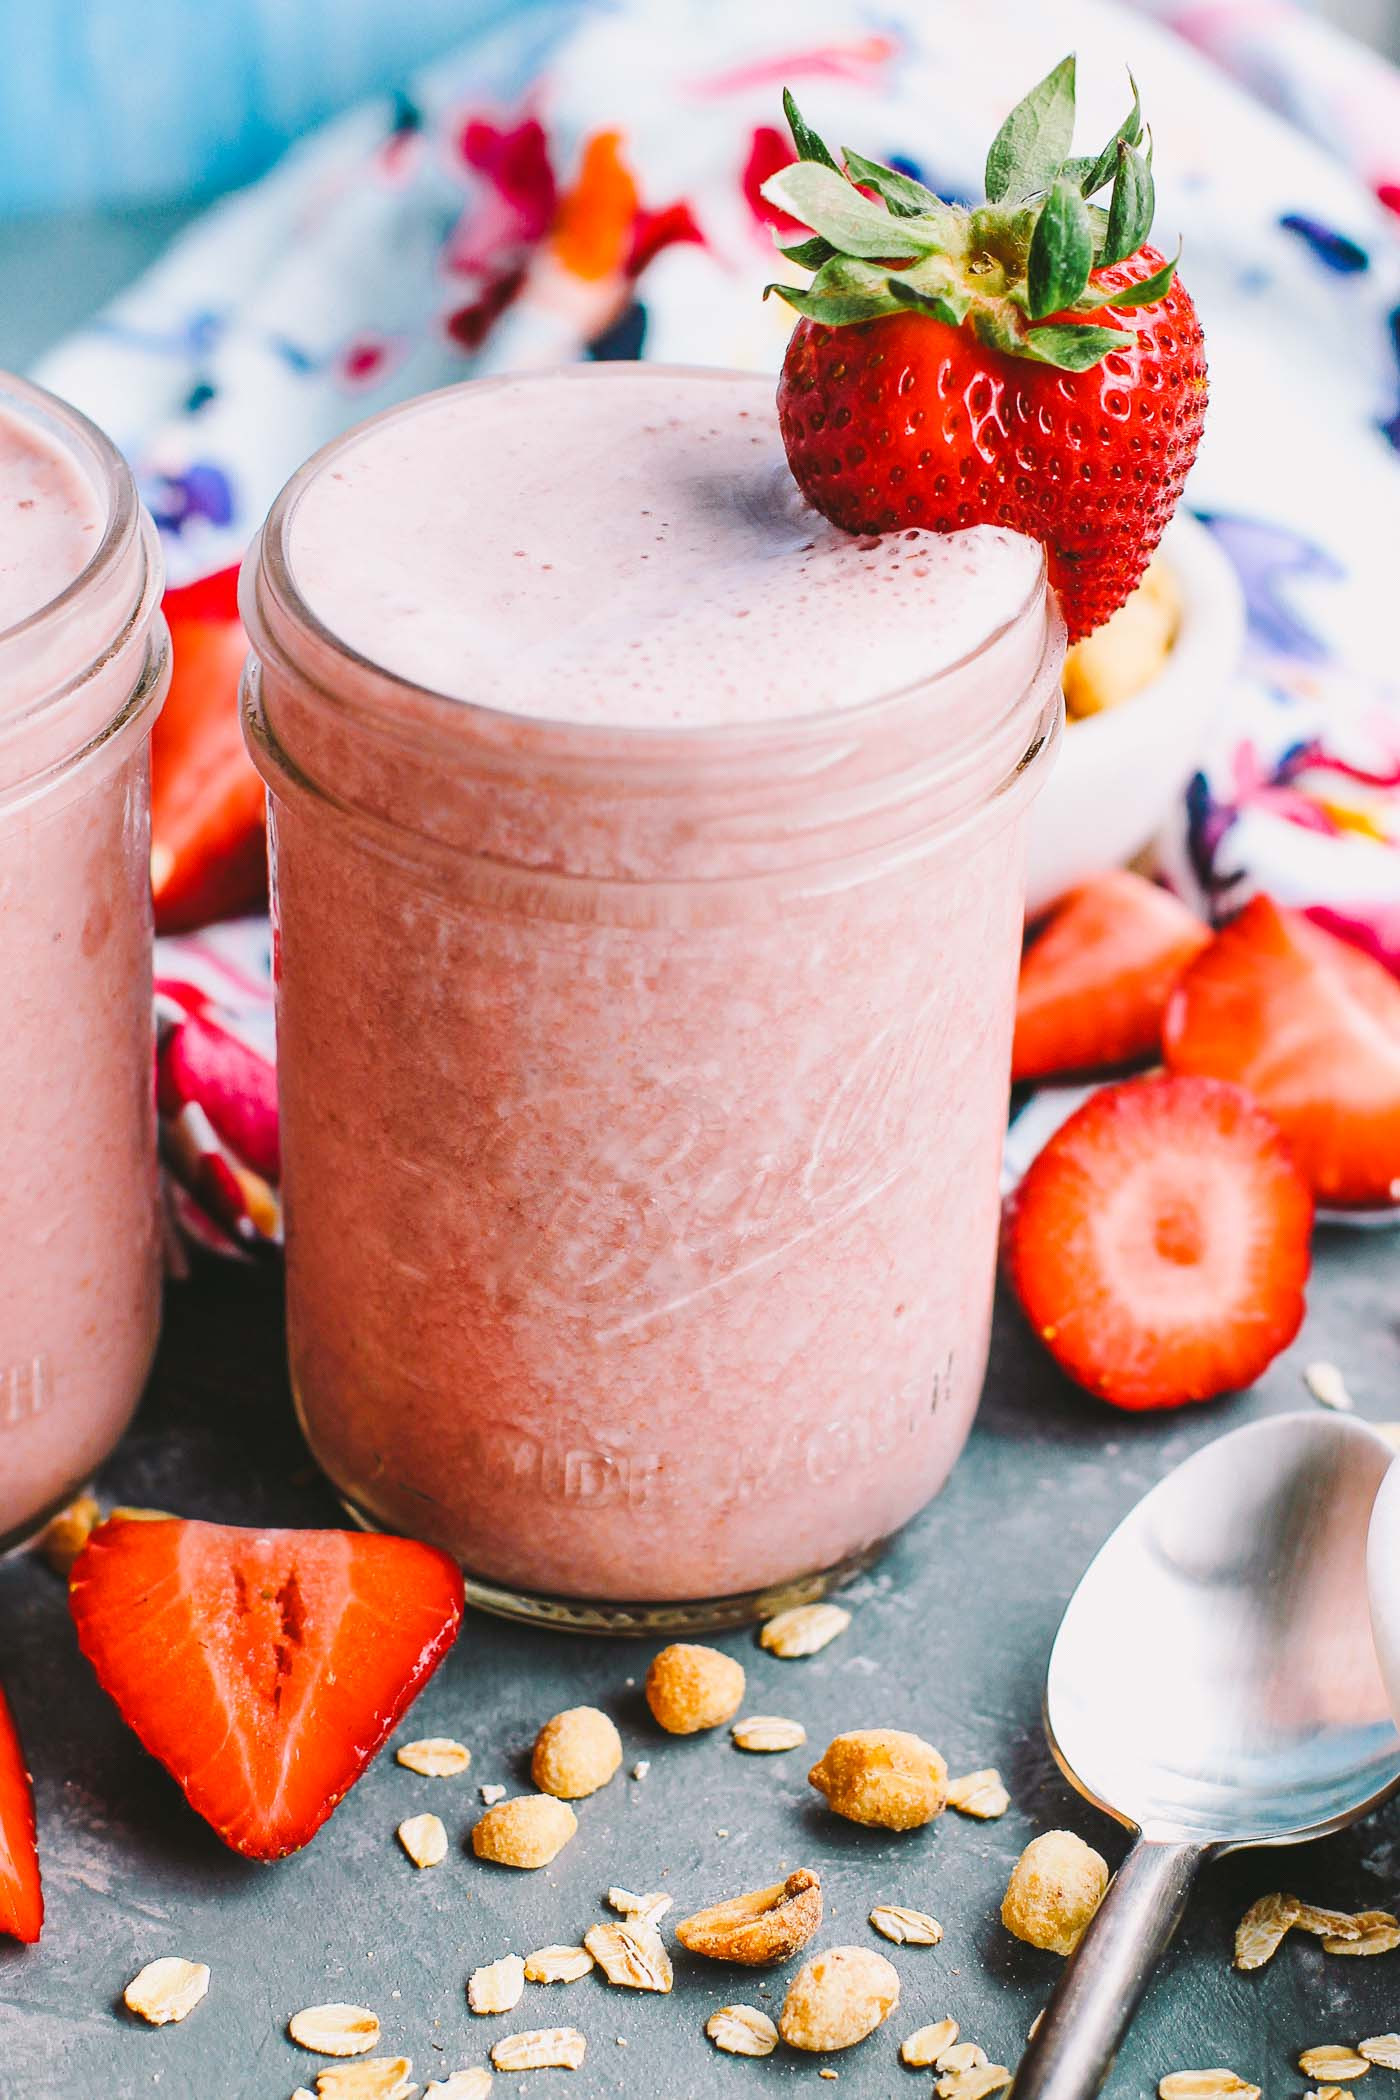 Healthy Breakfast Smoothies
 strawberry pb&j protein smoothies plays well with butter